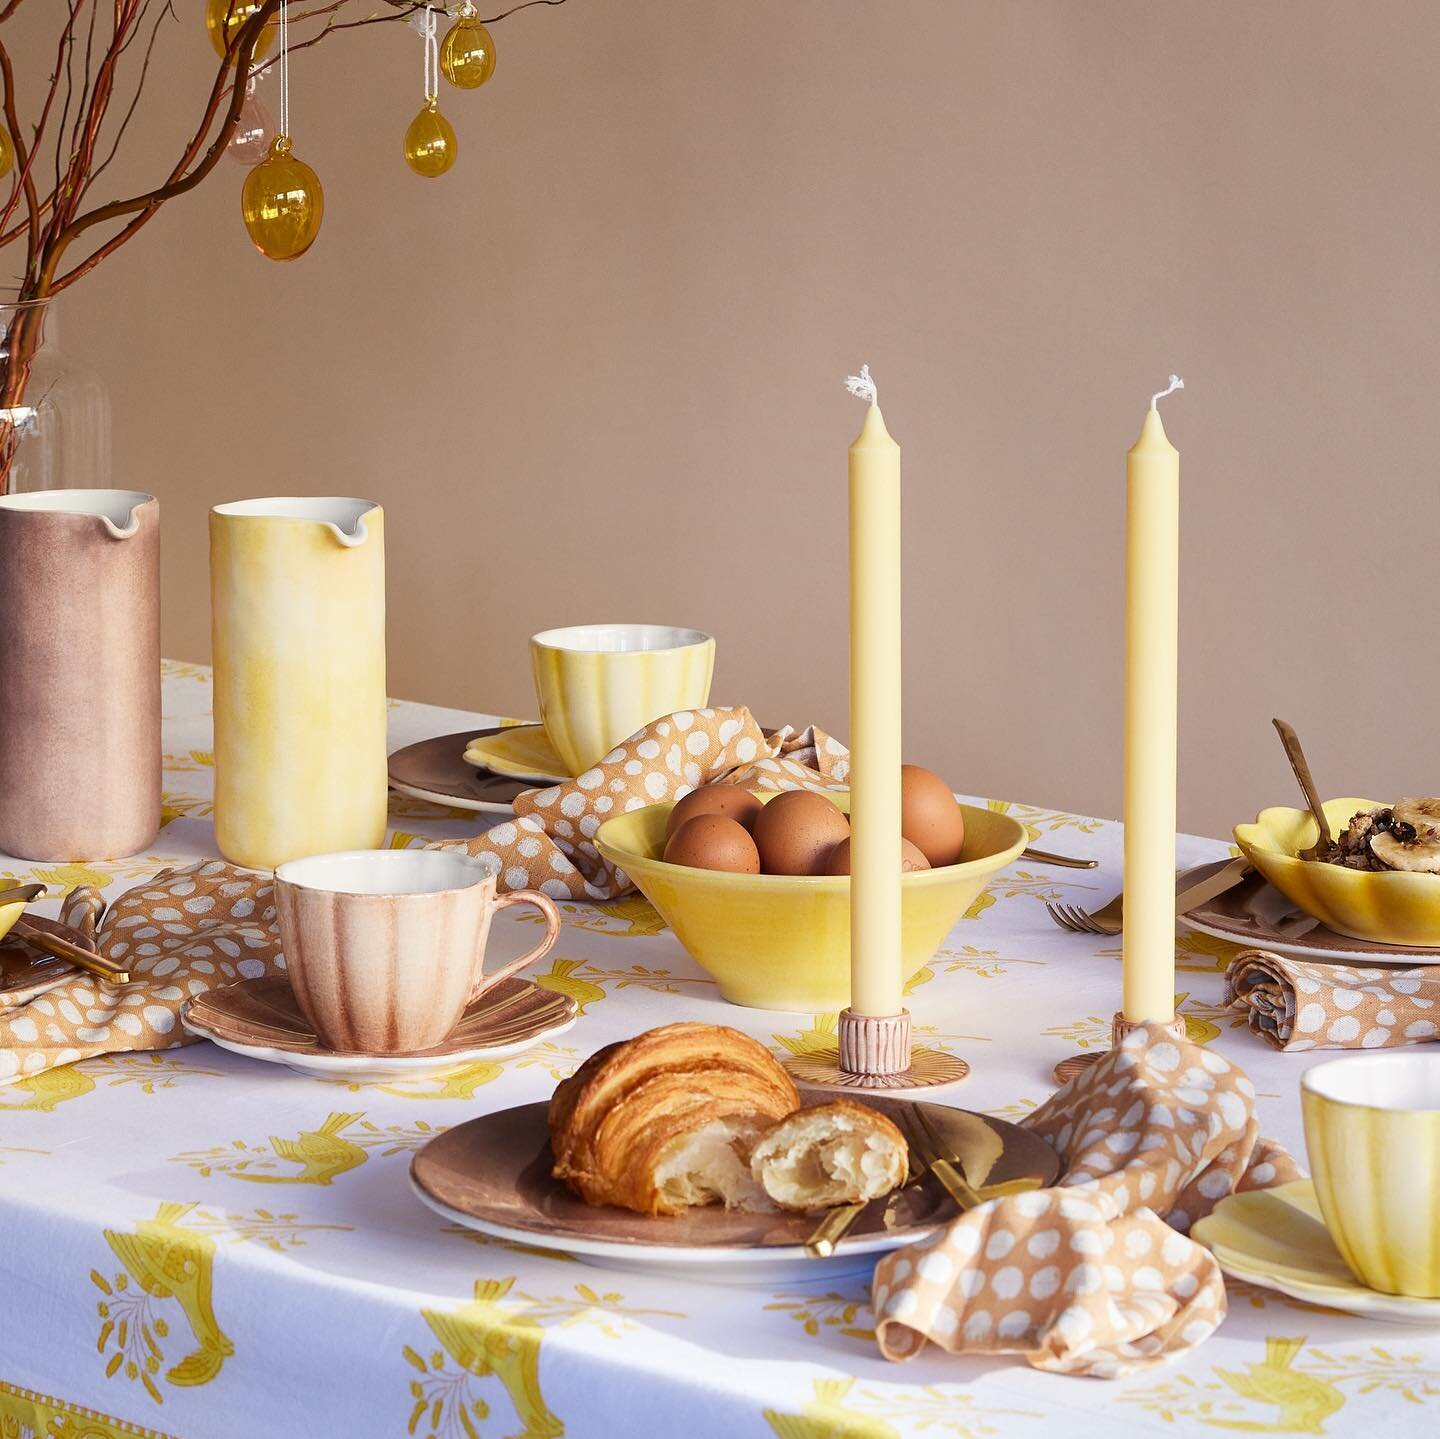 Mateus - Easter table setting inspiration🐰💛

Create the table you love with mixed pieces from Mateus - the perfect tableware for any occasion!

#mateus #mateuscollection #tableware #tabletop #tabletopinspiration #interior #interiorinspo #interiorde